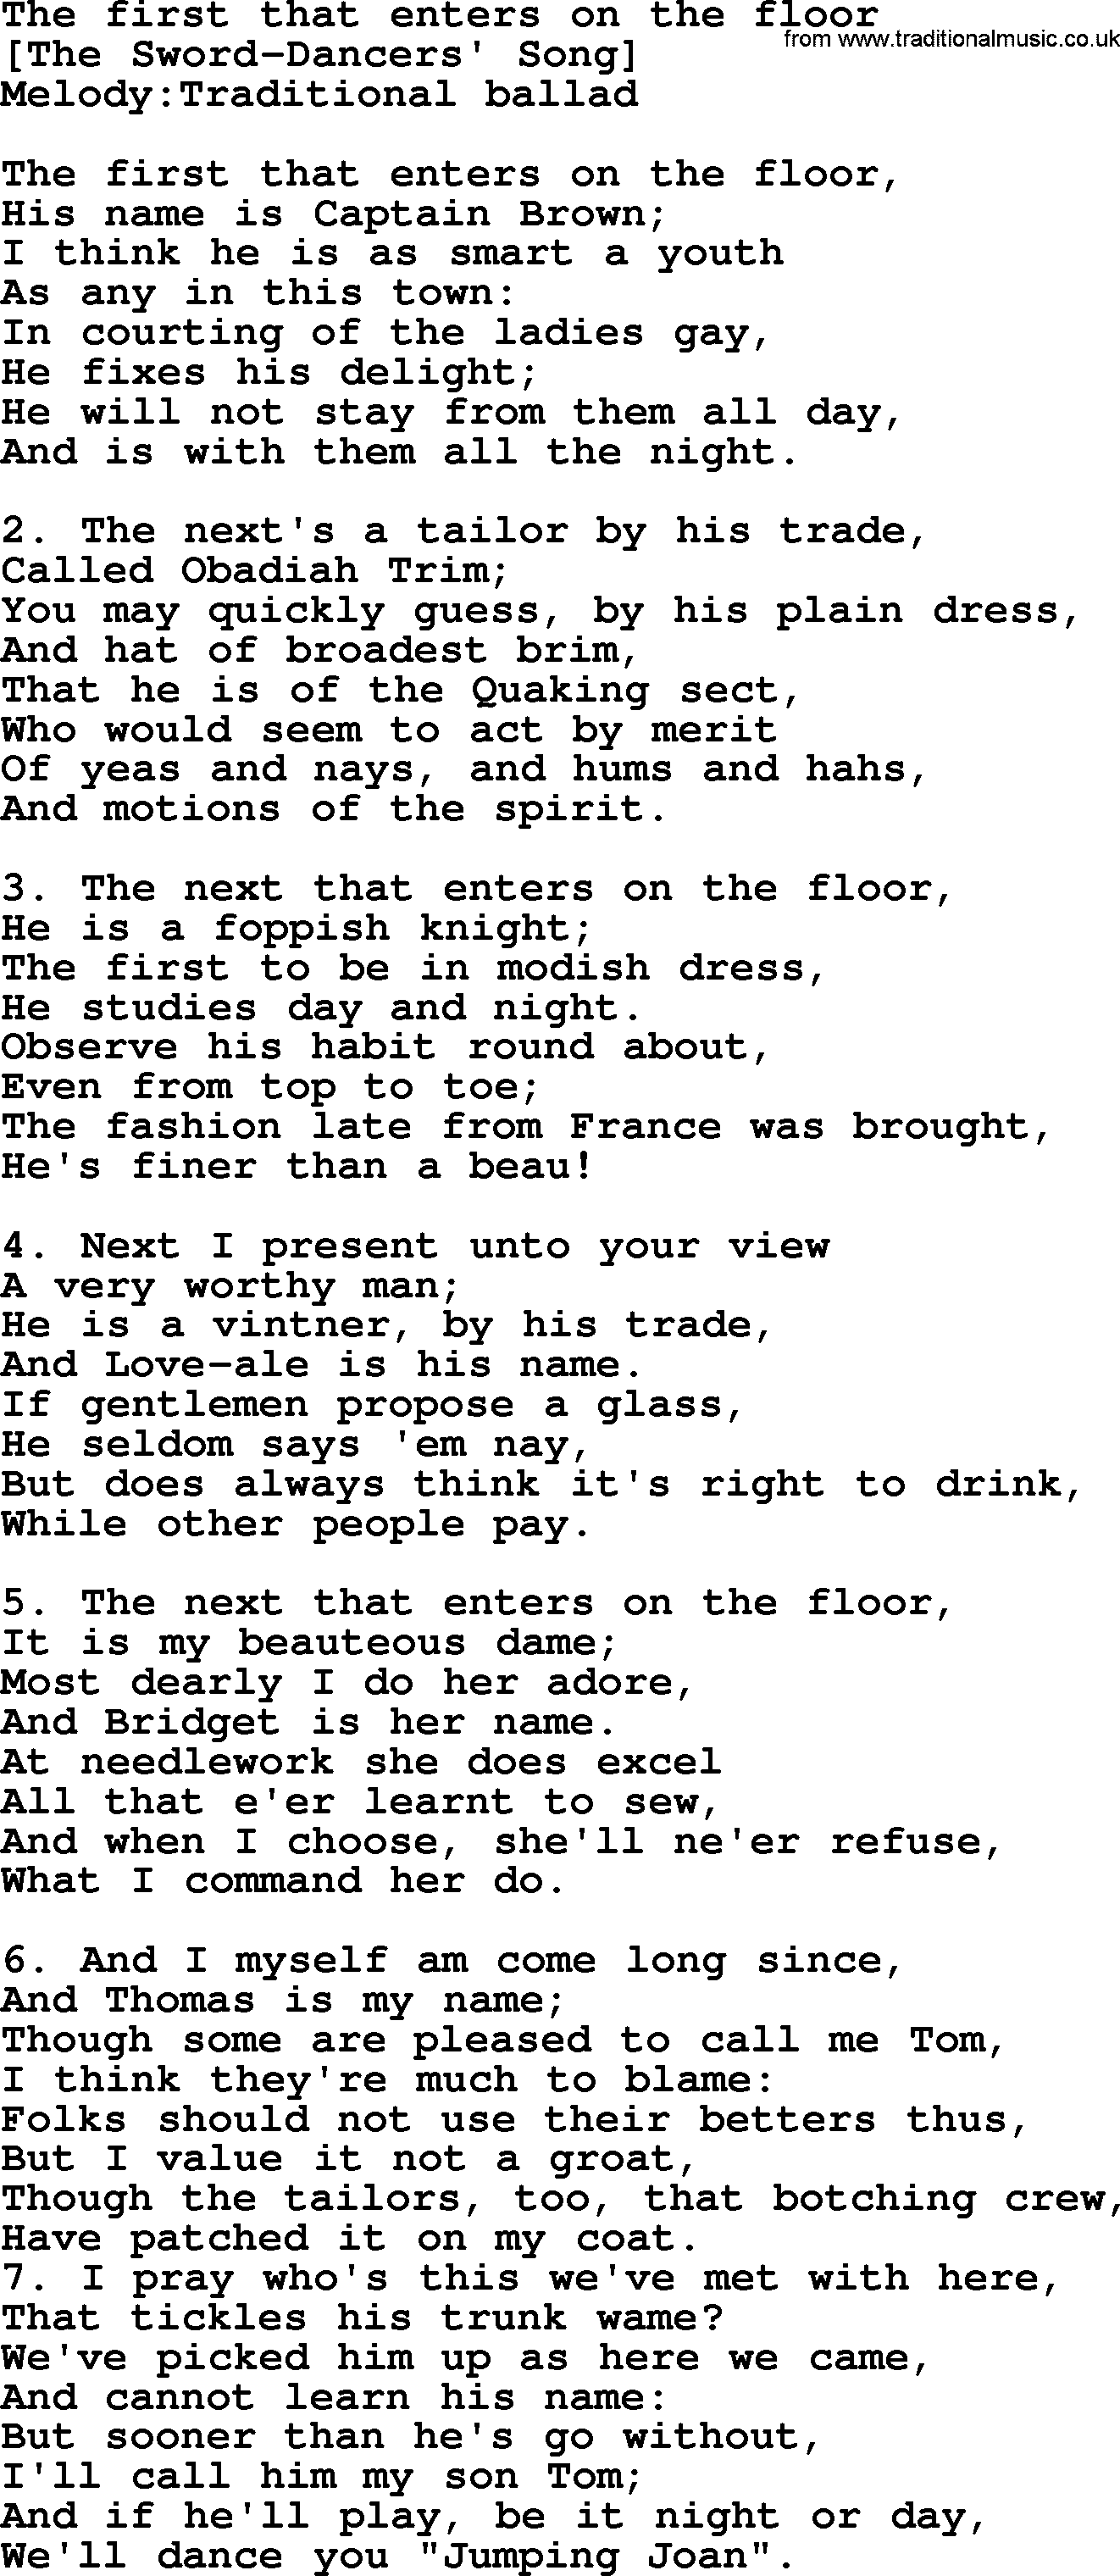 Old English Song: The First That Enters On The Floor lyrics